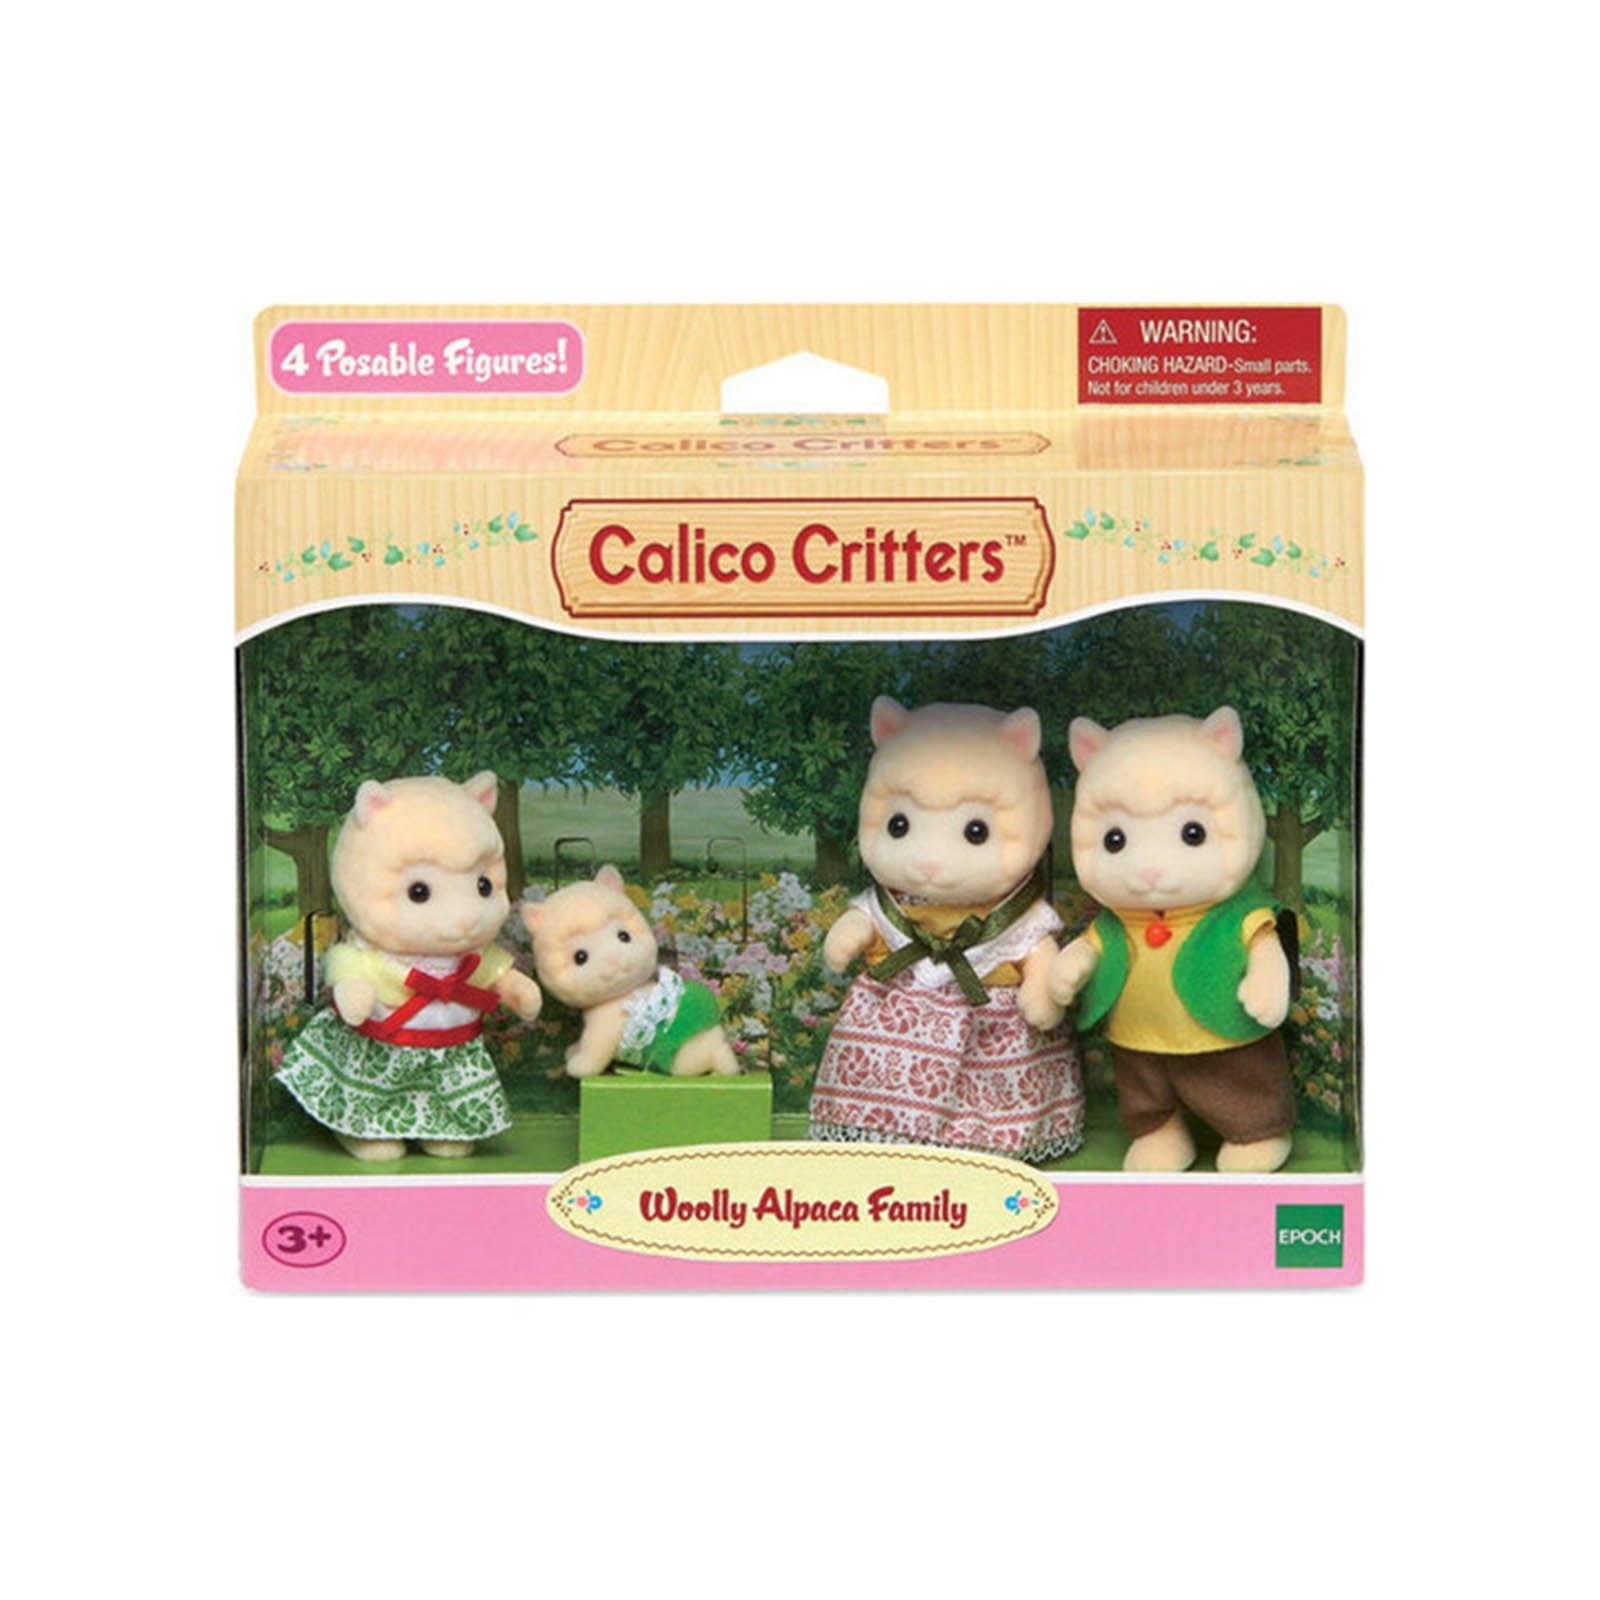 Calico Critters : Woolly Alpaca Family